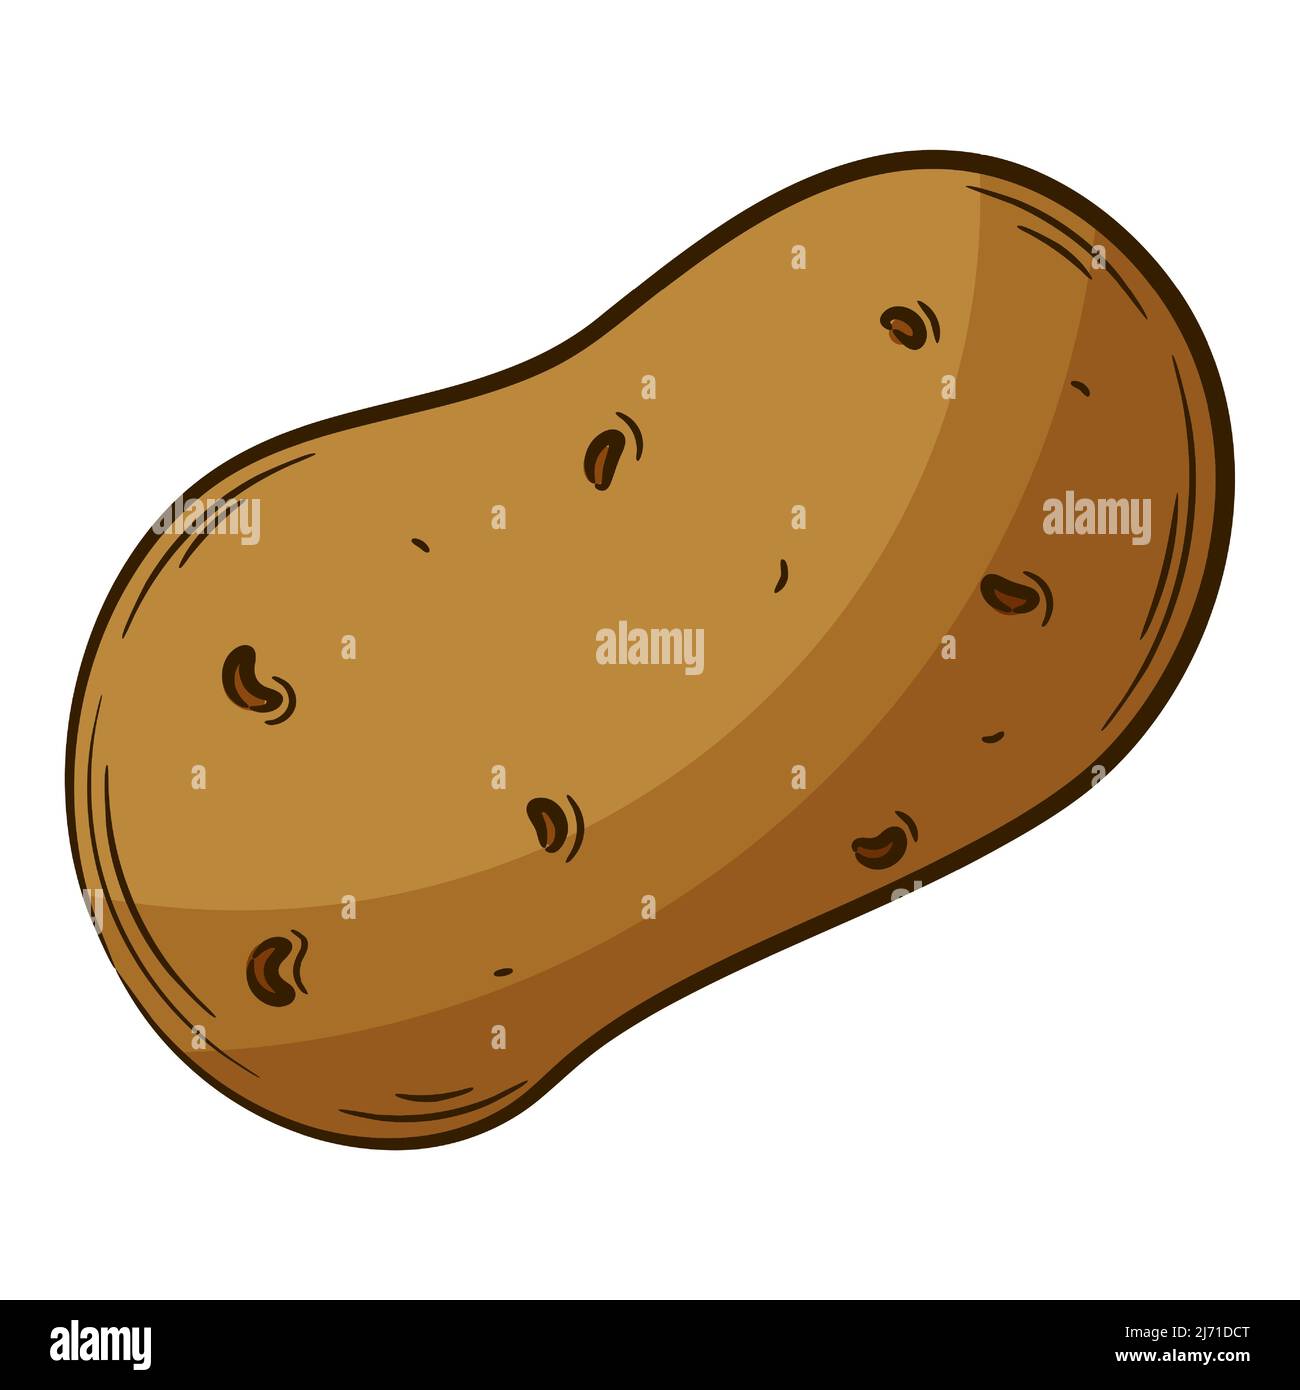 Potato Drawing Vector Images over 8600